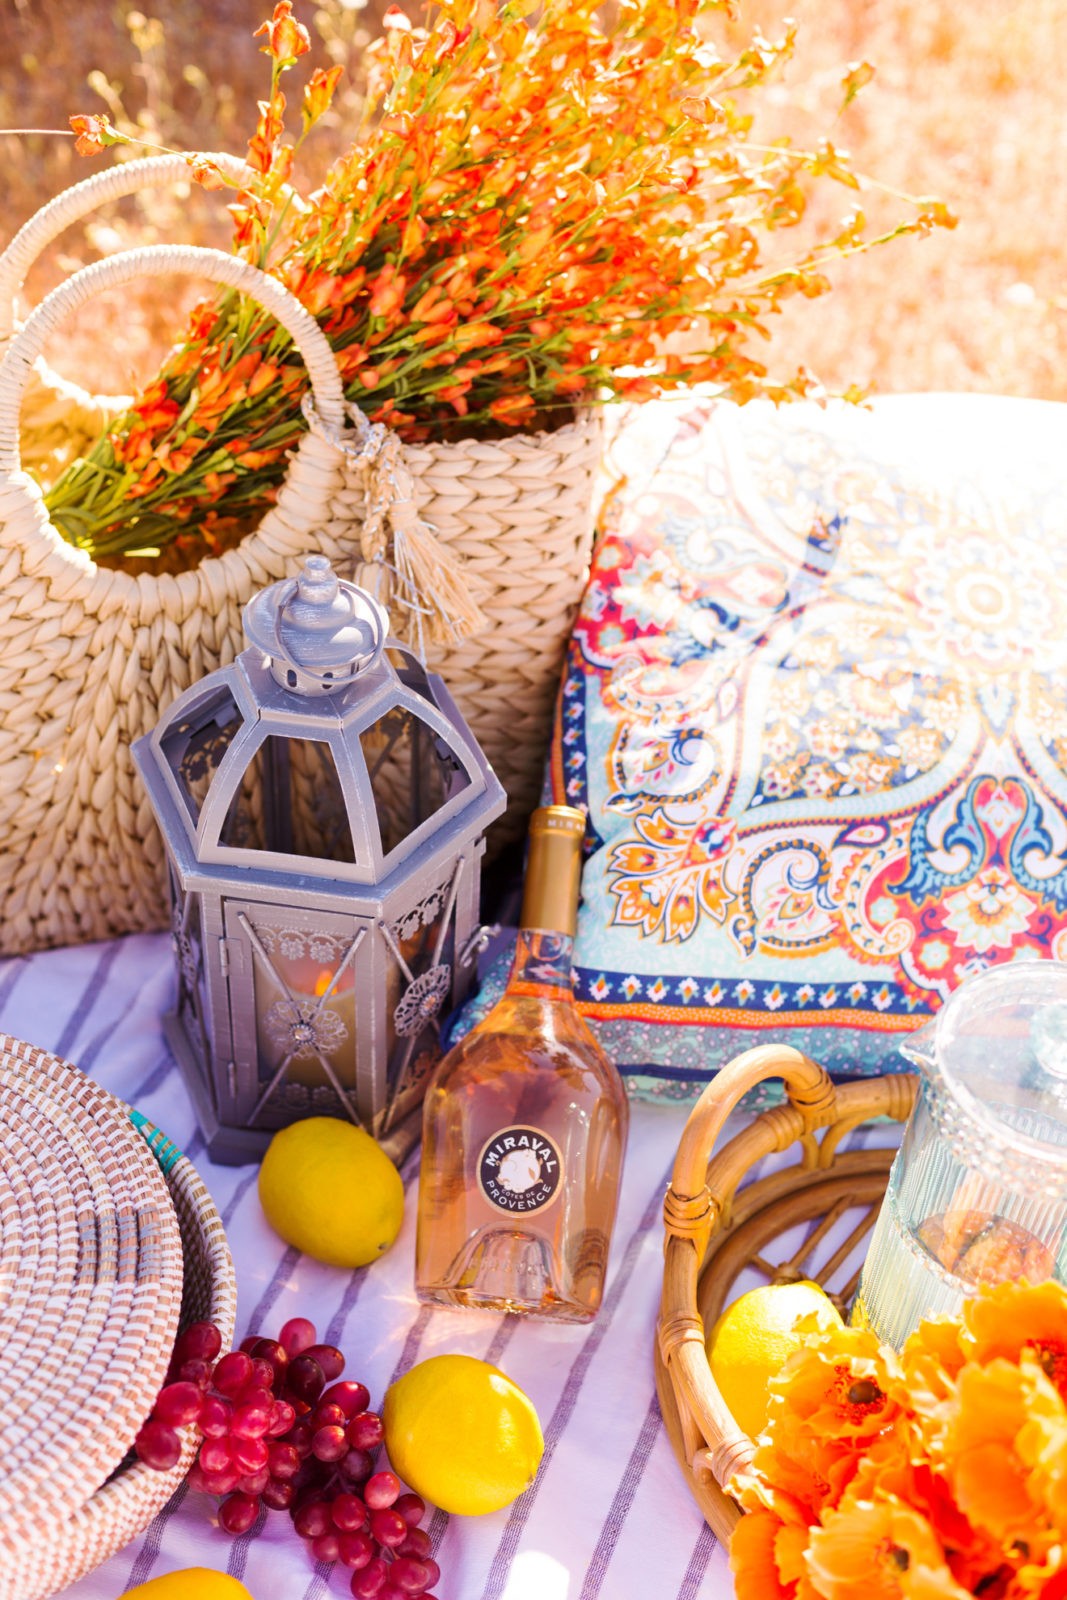 Moroccan Picnic Inspiration in the Desert by Fashion Blogger Laura Lily, Joshua Tree National Park